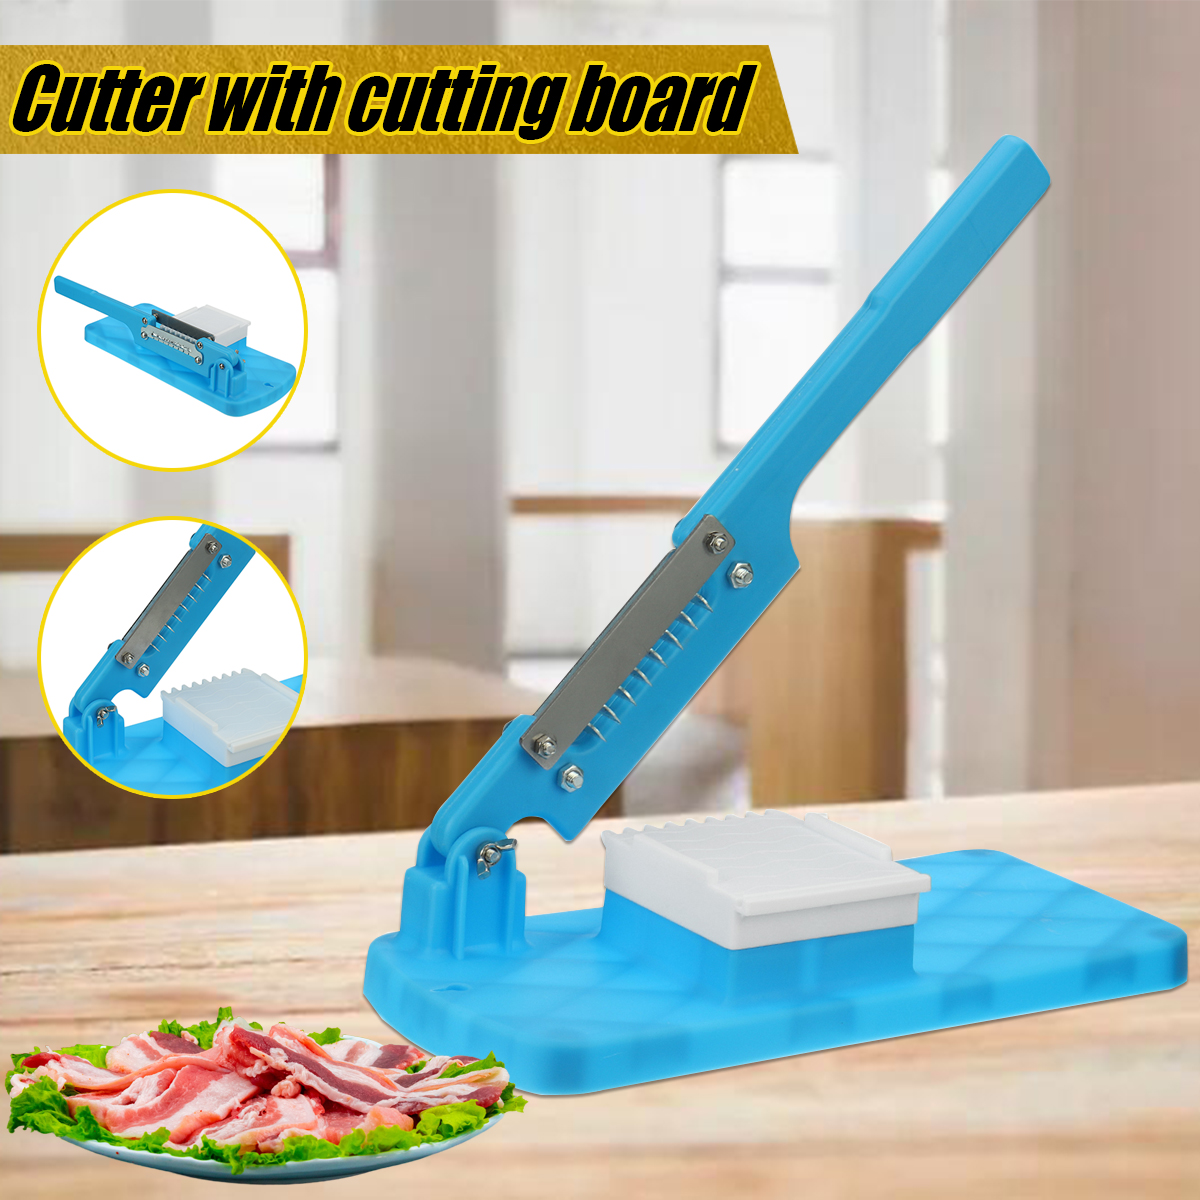 Multifunctional-Table-Slicer-Manual-Lamb-Beef-Meat-Cutting-Machine-Mutton-Rolls-Cutter-Slicing-Knife-1892761-12